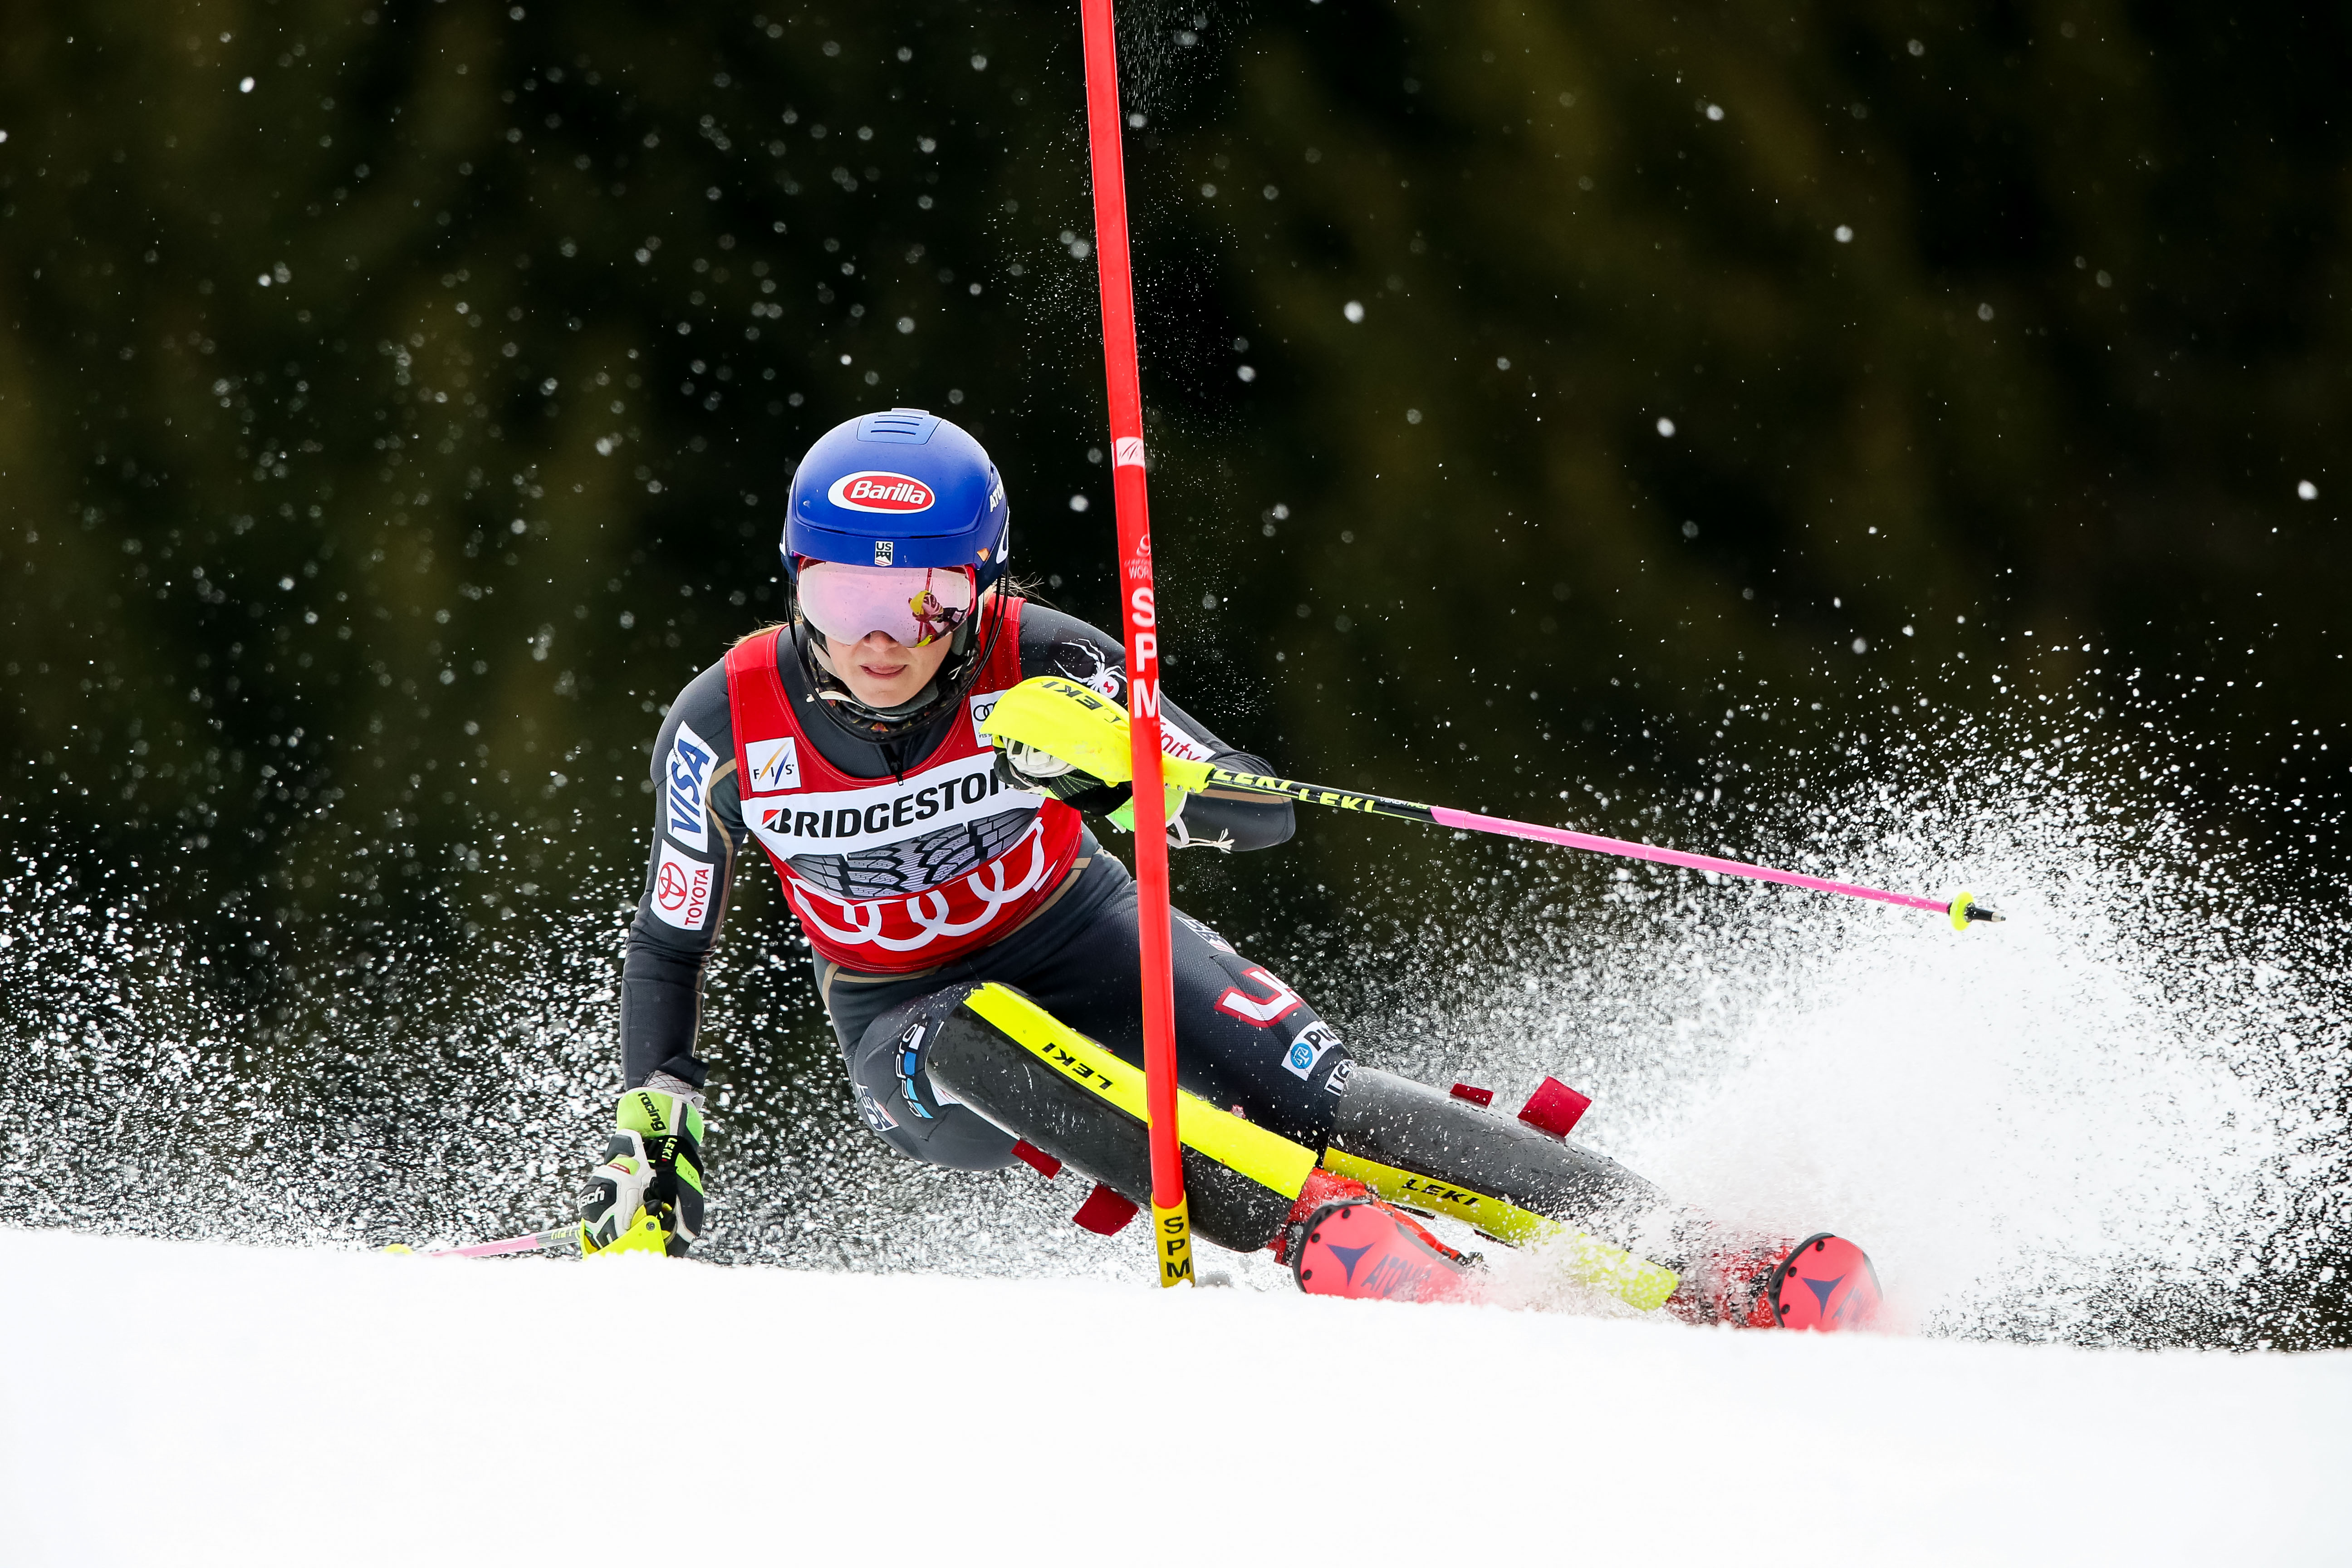 Mikaela Shiffrin won her 42nd World Cup race Saturday in Ofterschwang, Germany. (Getty Images/Agence Zoom - Christophe Pallot)